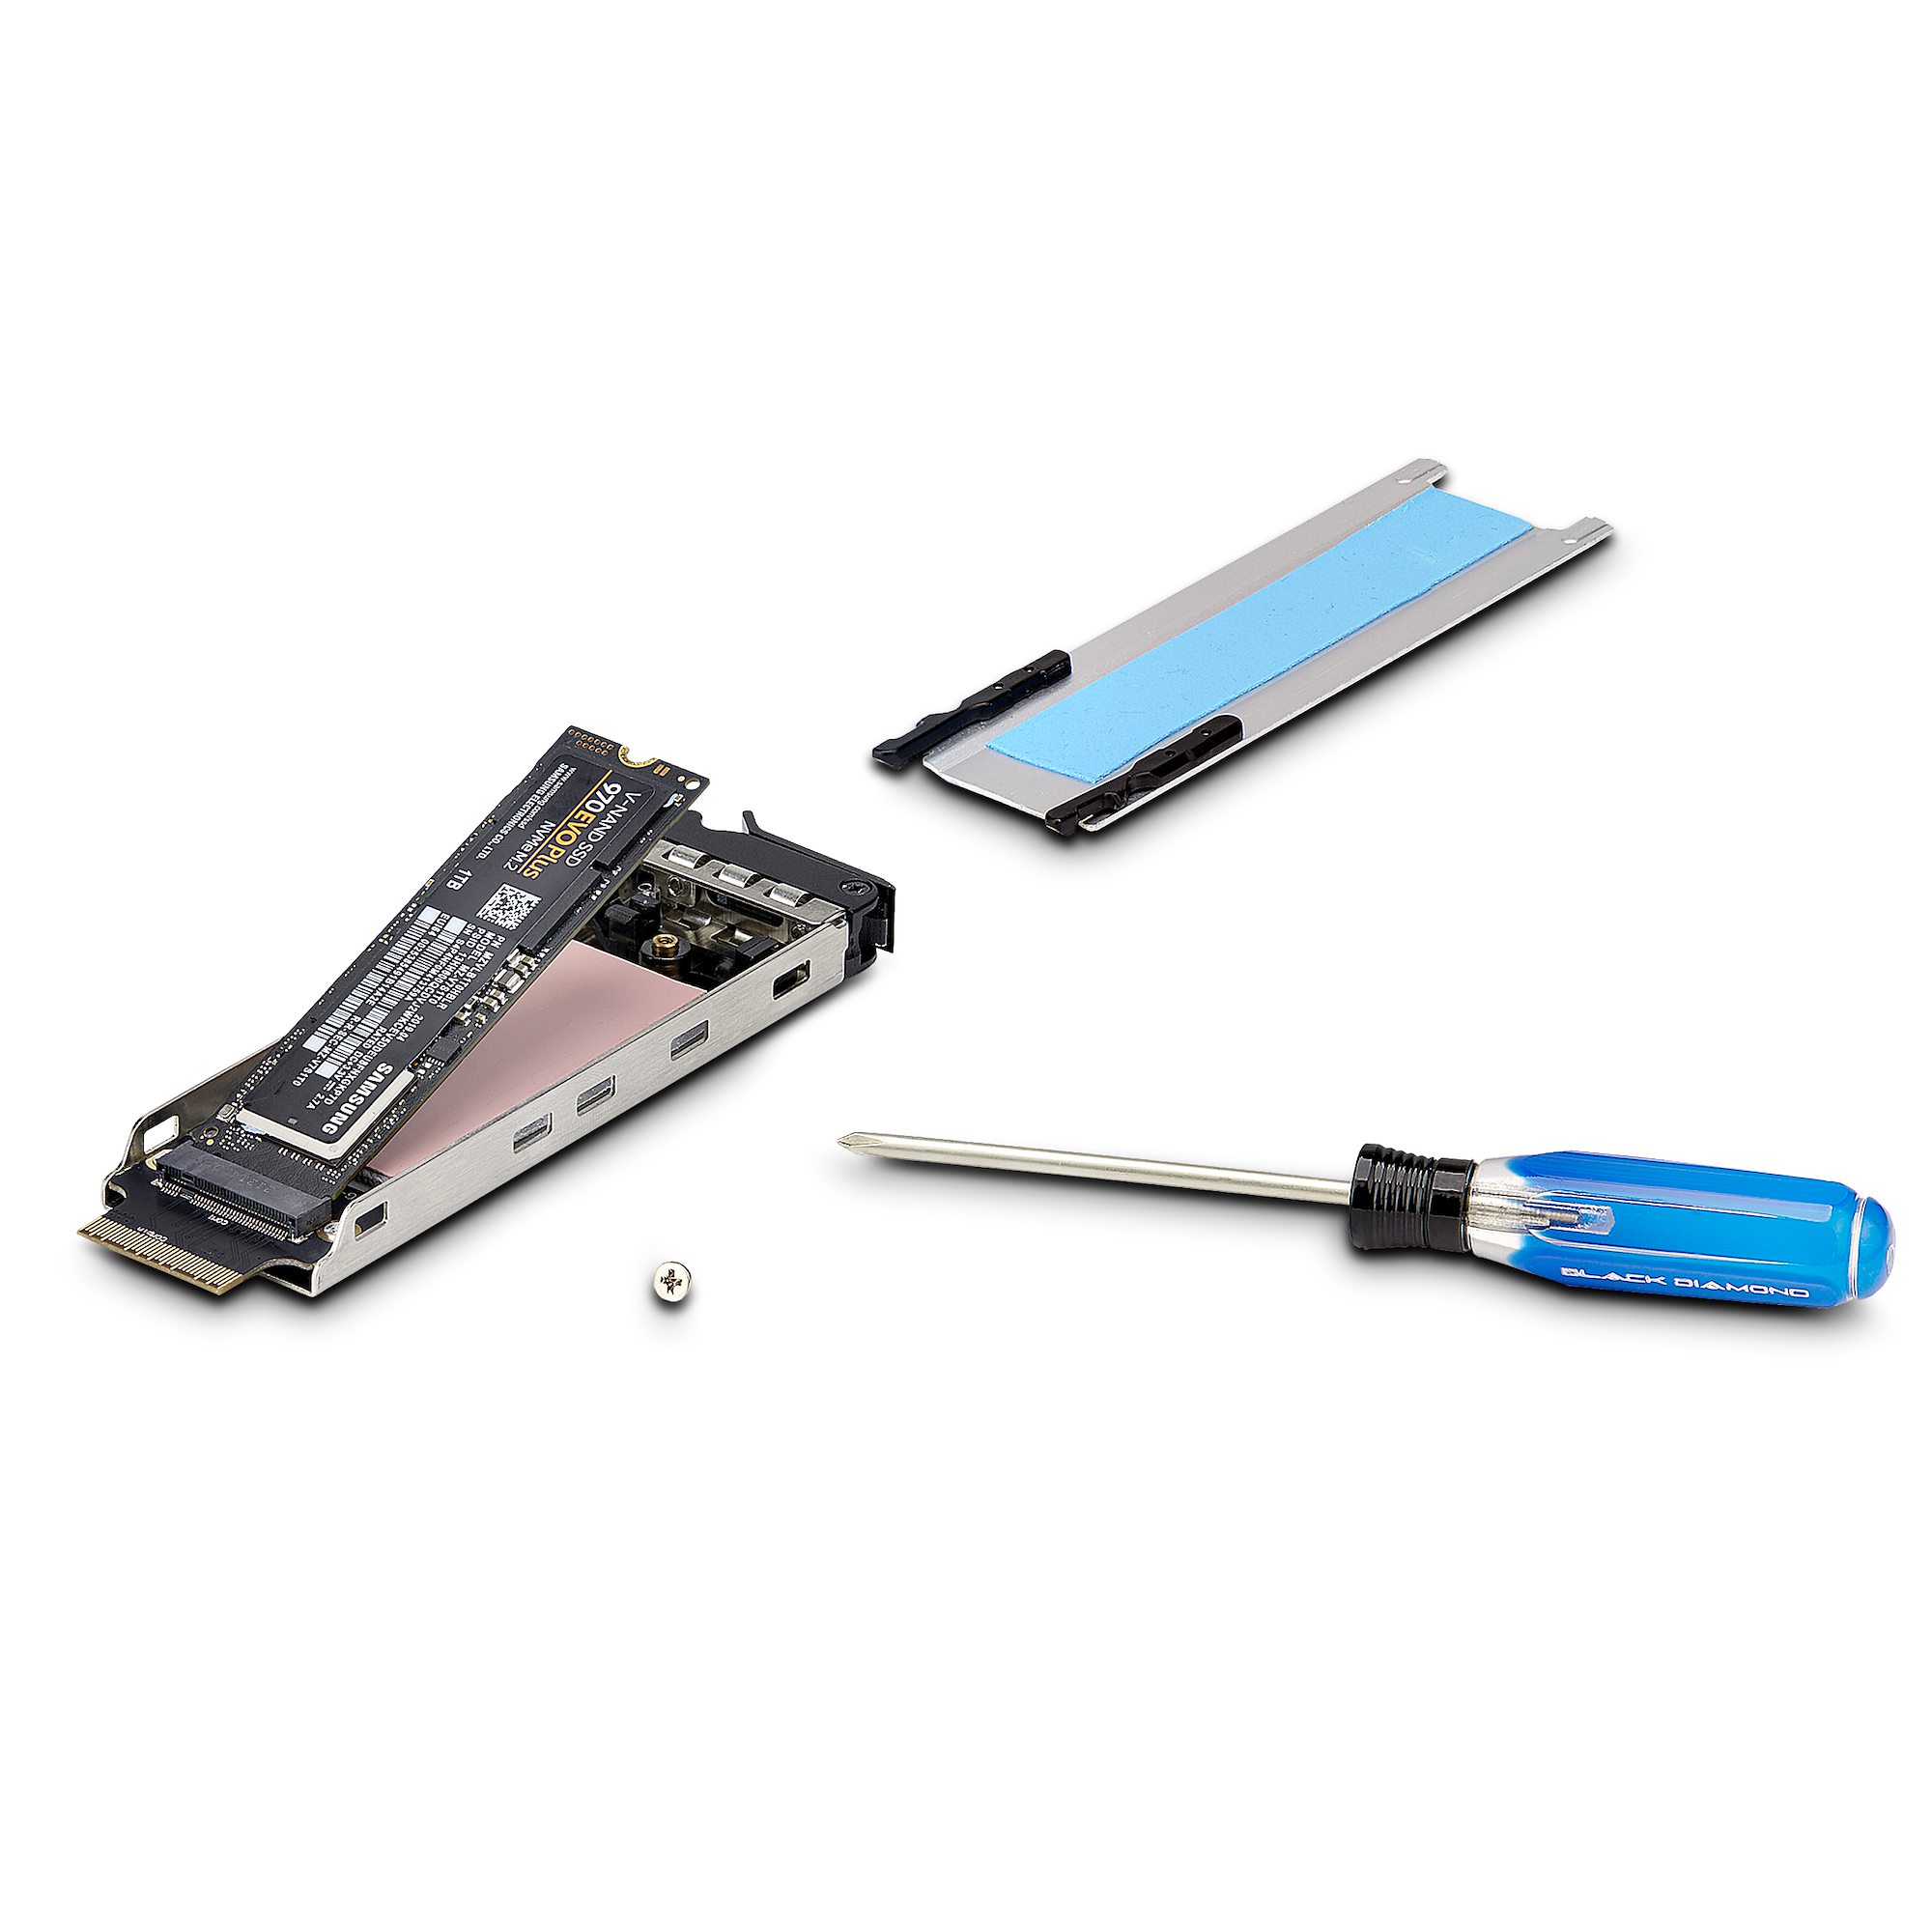 Product  StarTech.com M.2 NVMe SSD to PCIe x4 Mobile Rack